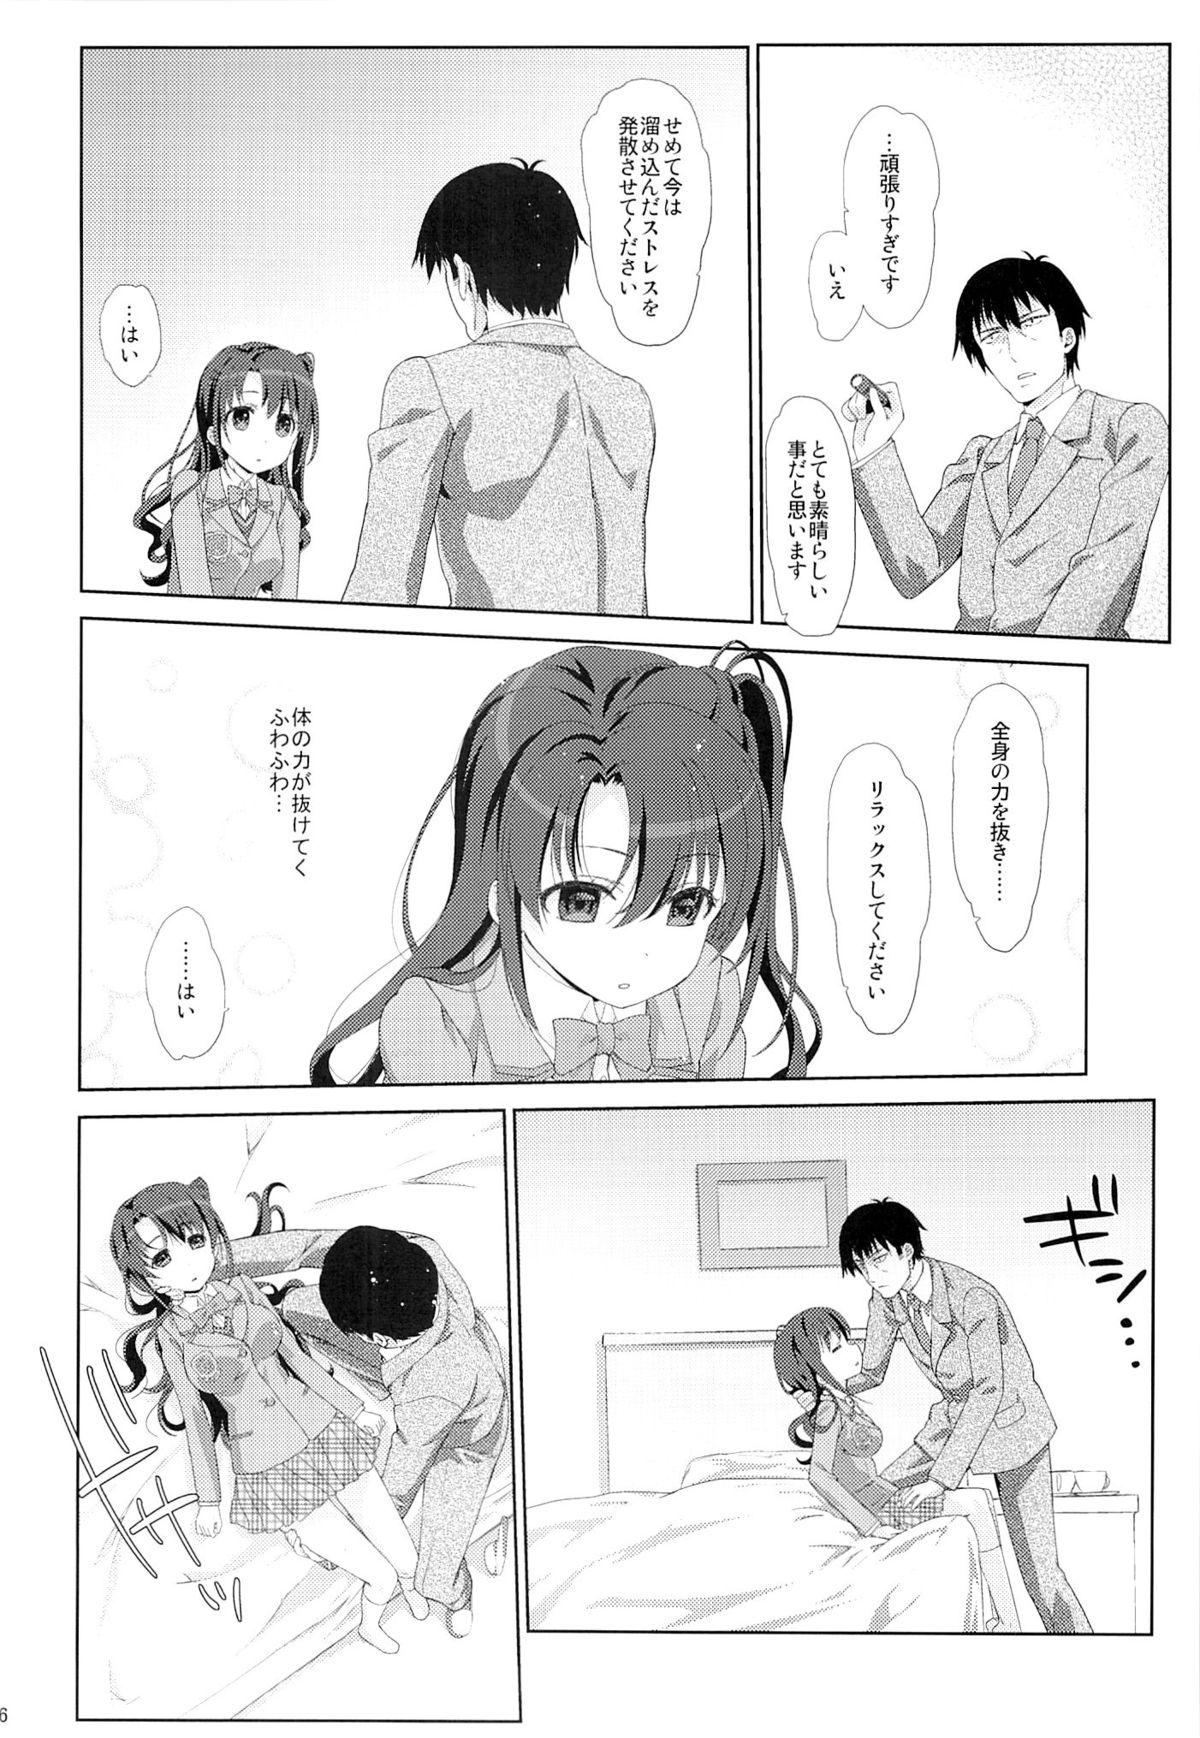 Indo Melcheese 48 - The idolmaster Sislovesme - Page 5